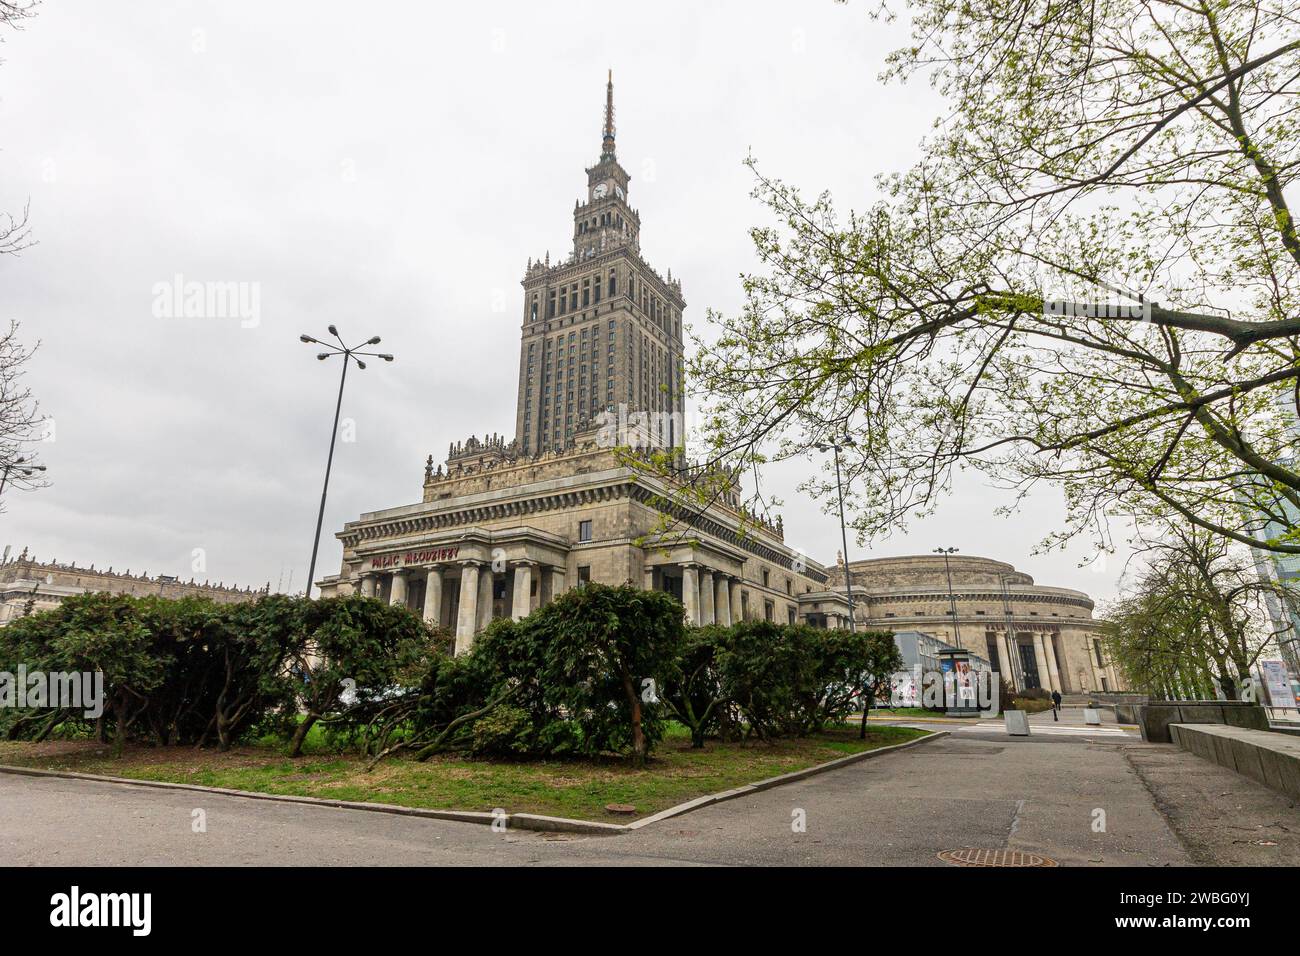 Warsaw, Poland. The Palace of Culture and Science (Palac Kultury i Nauki - PKiN), a high-rise building and clock tower in Stalinist architecture style Stock Photo